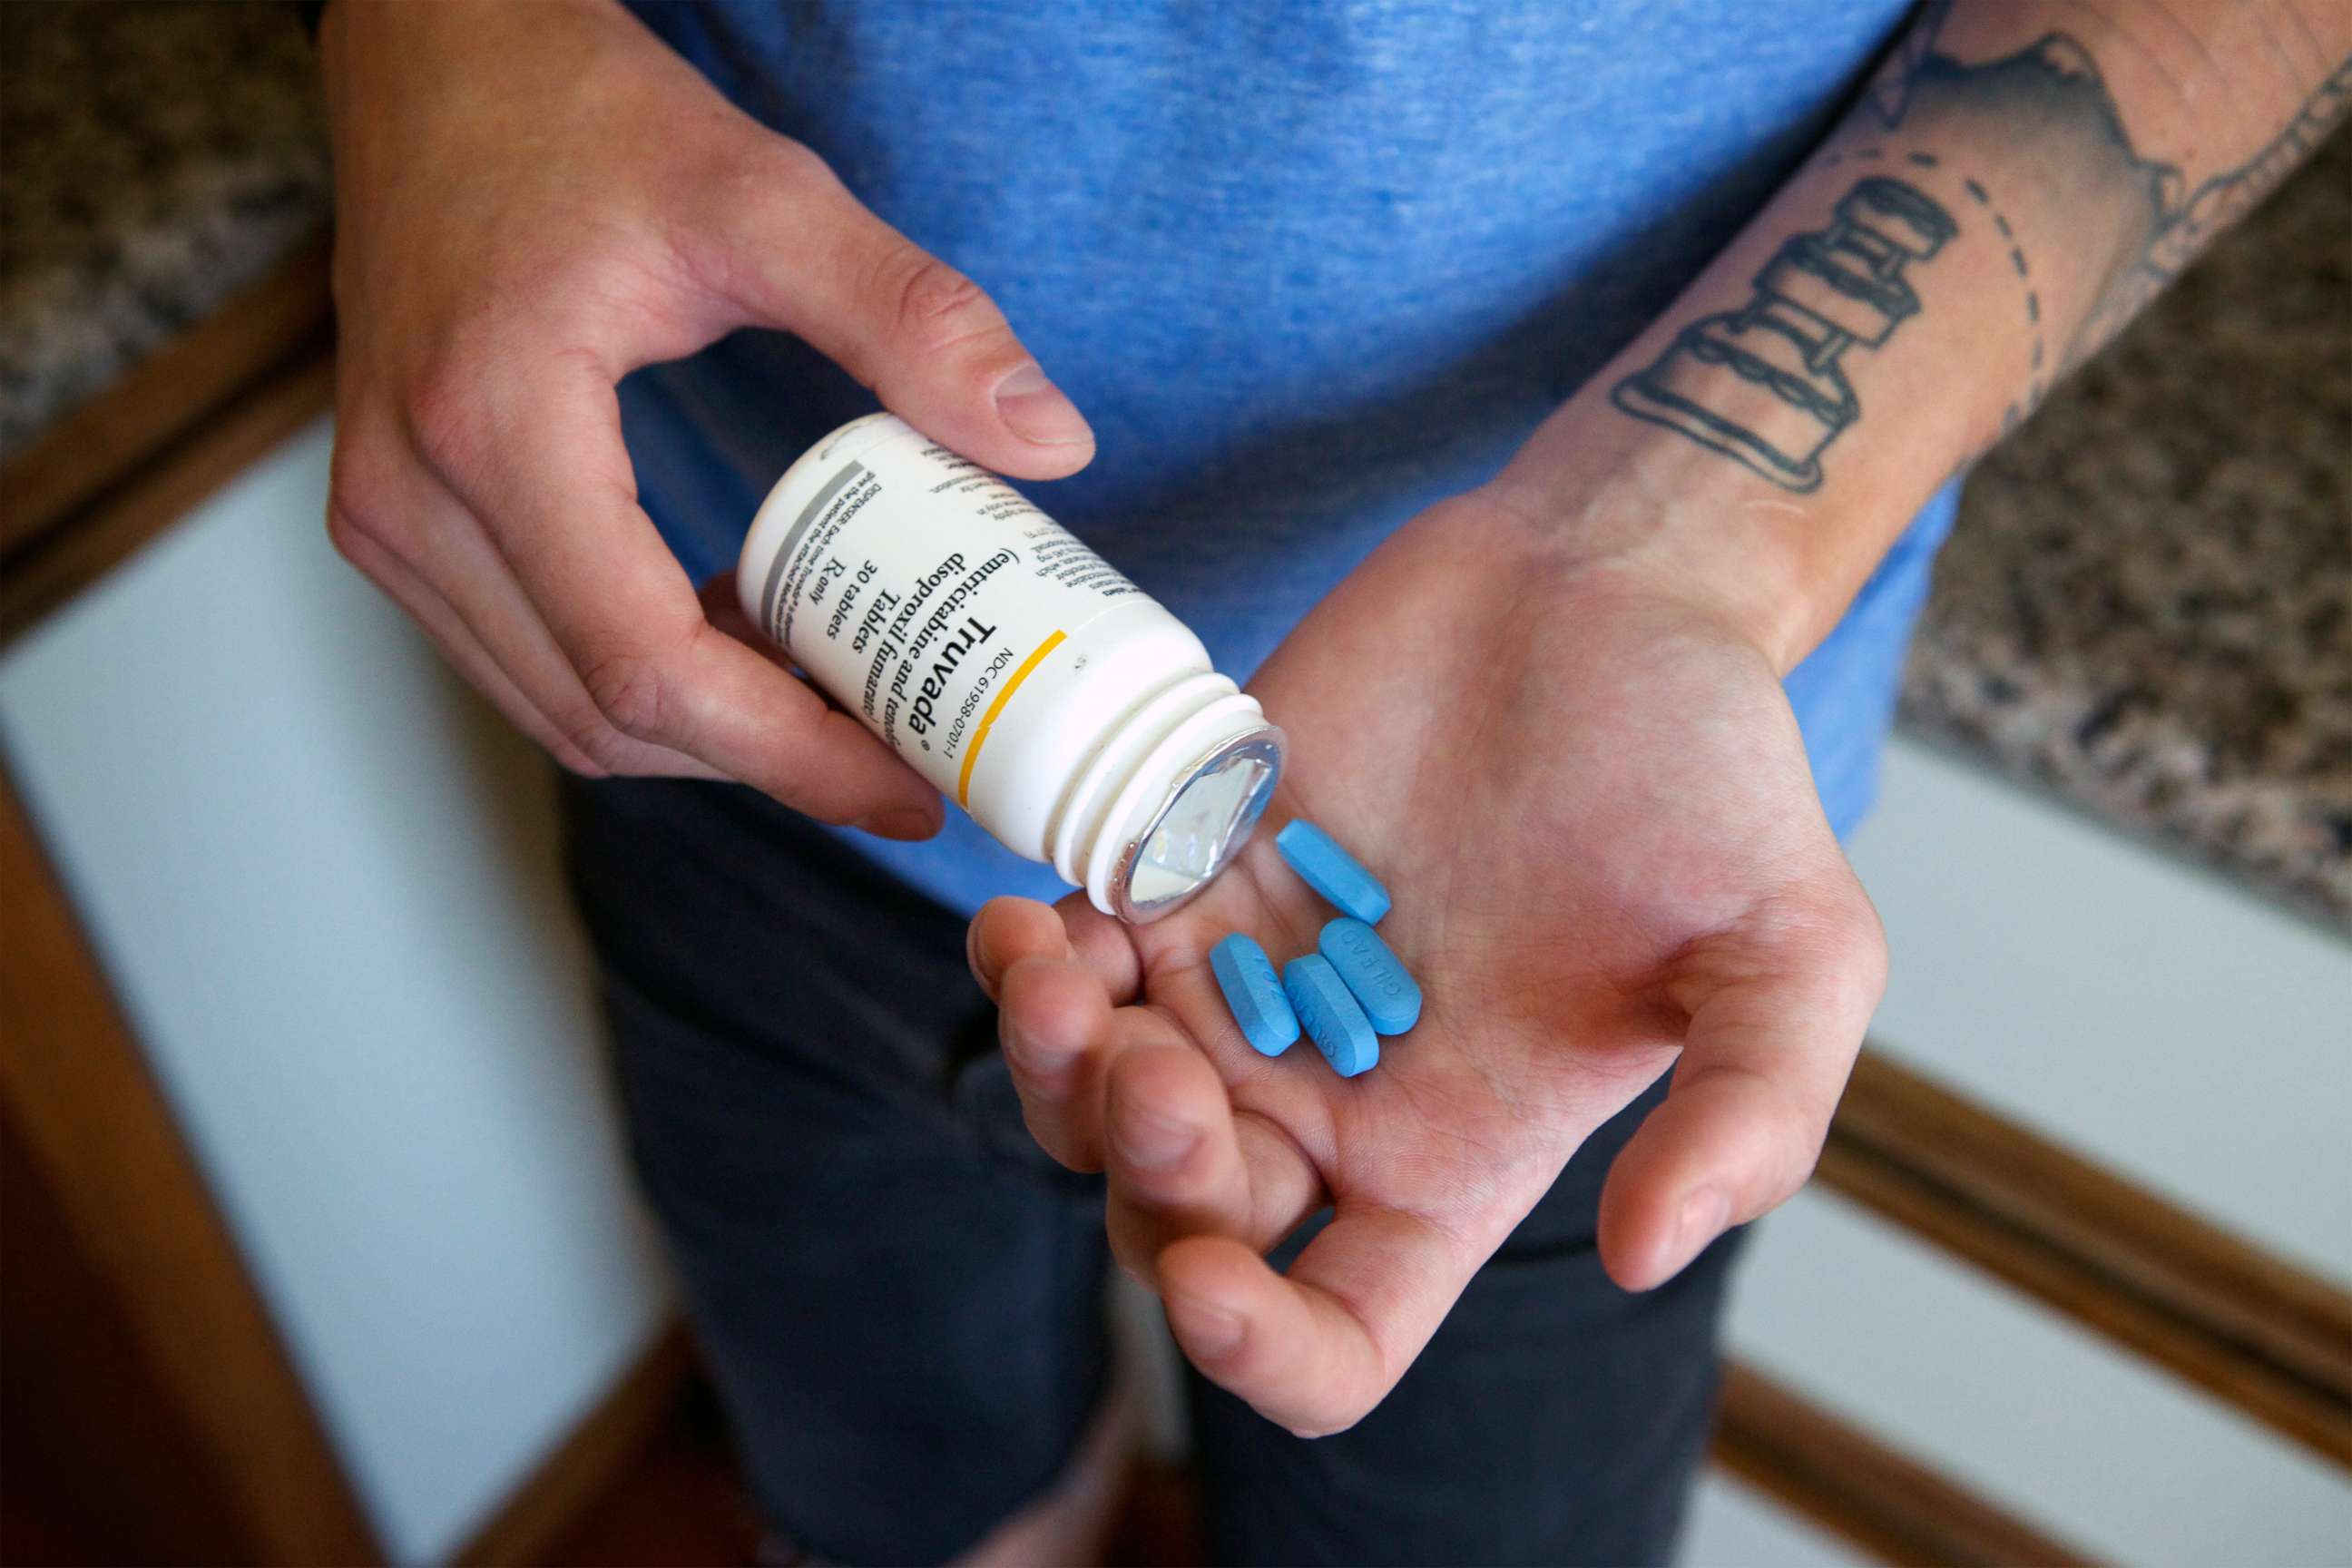 PHOTO: An activist with the San Francisco AIDS Foundation takes his dose of Truvada, a antiretroviral shown to prevent new HIV infections, in San Francisco on May 14, 2014.